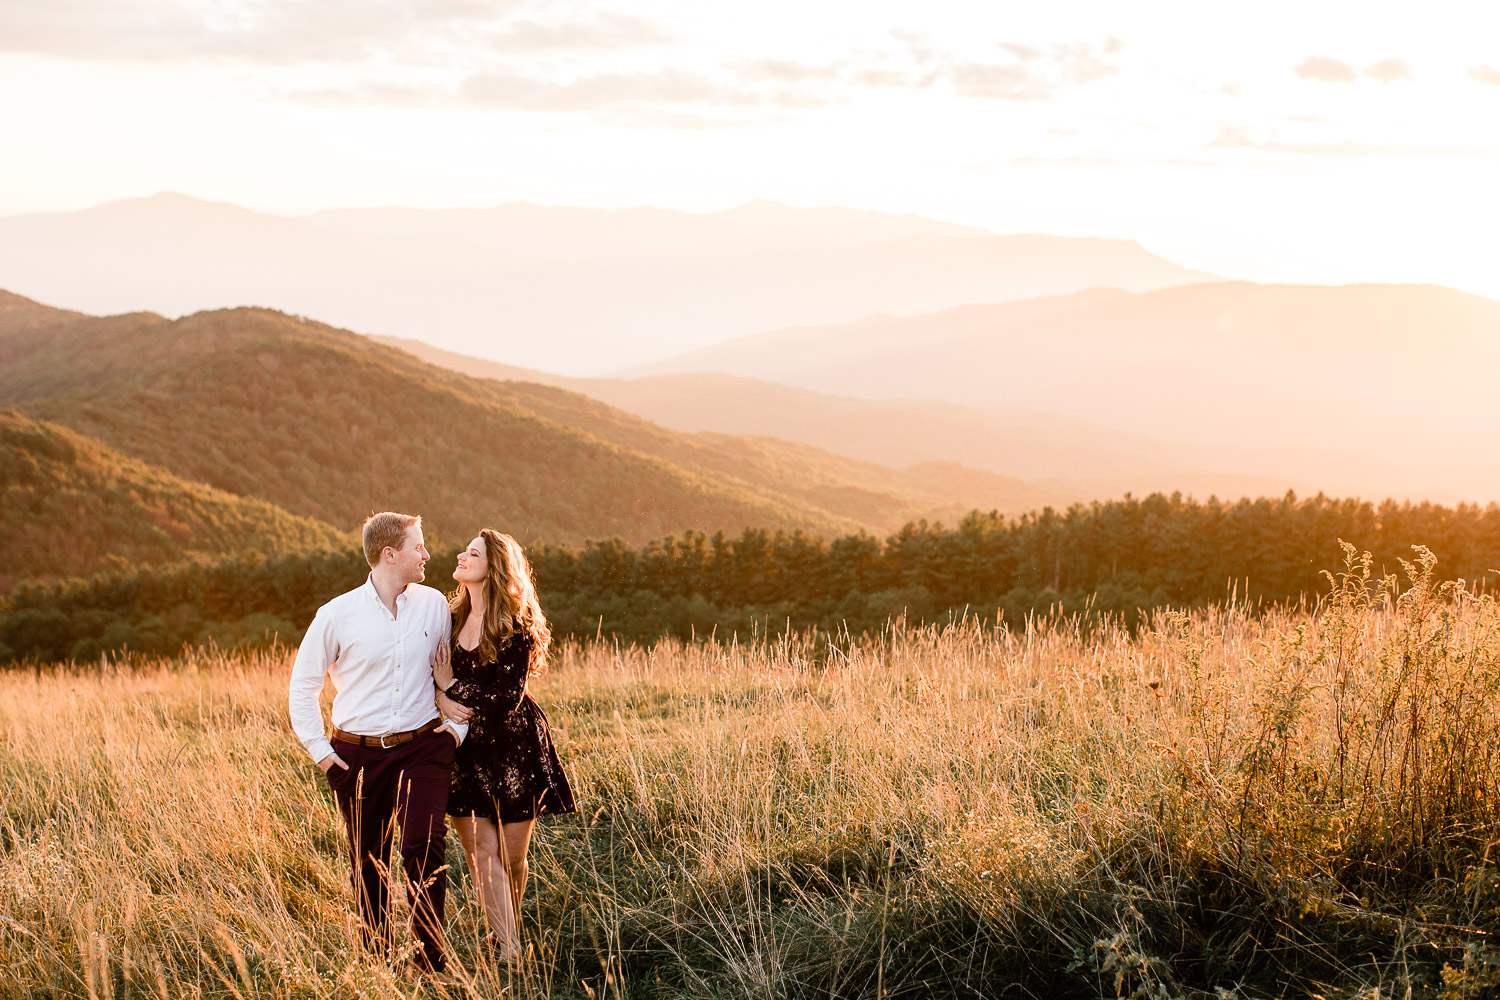 Max Patch Engagement session, golden hour at sunset